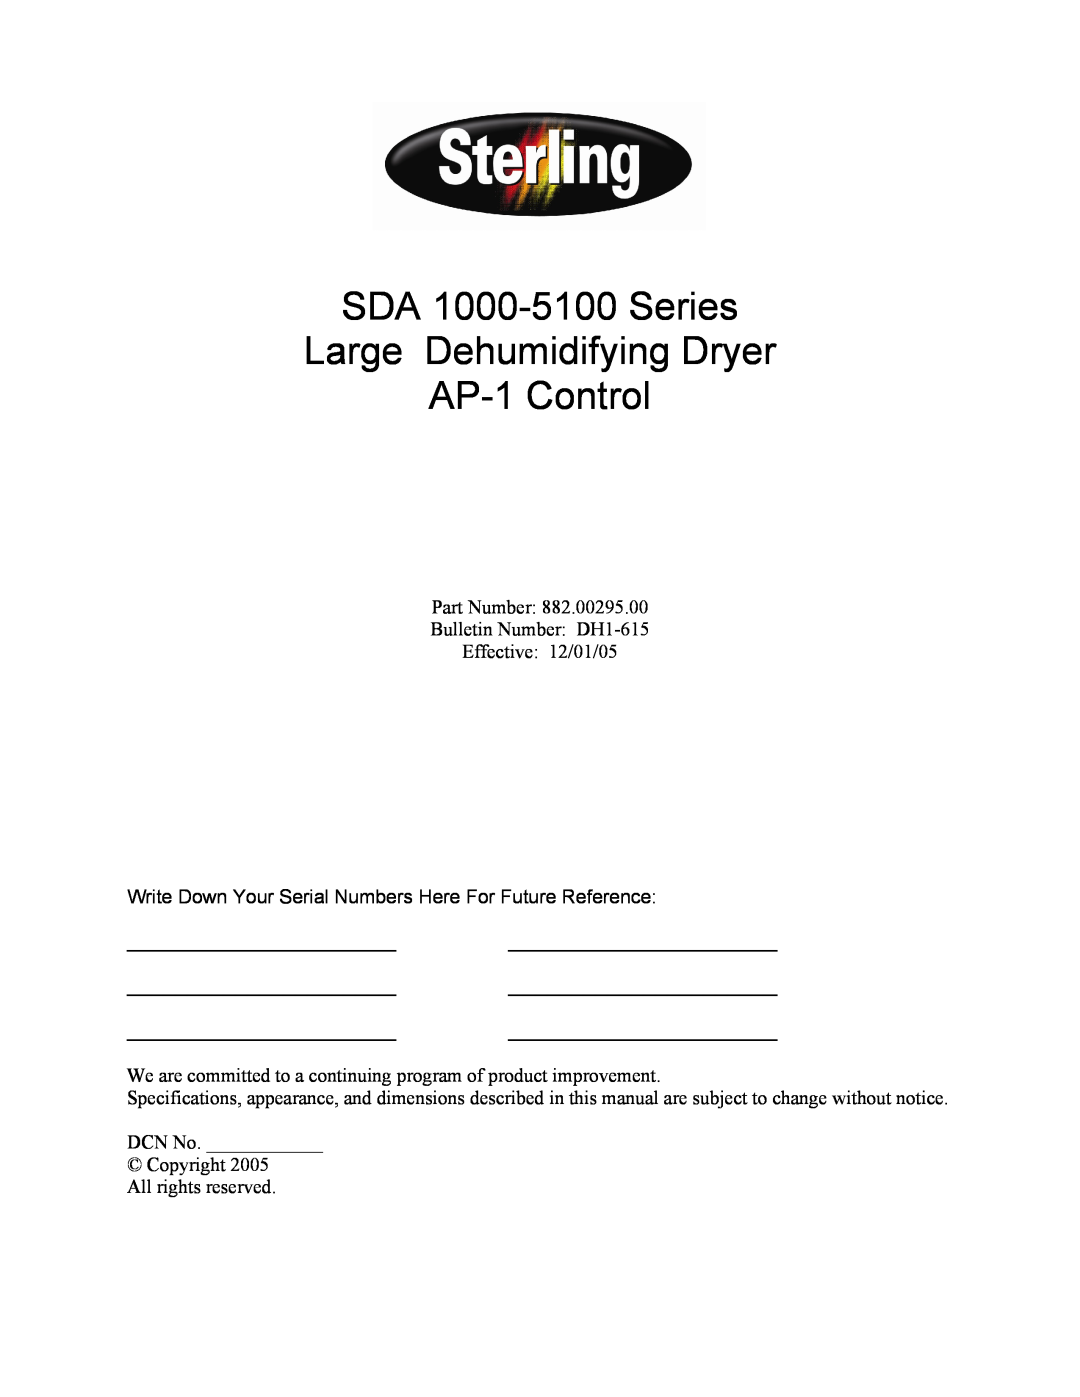 Sterling 882.00295.00 specifications SDA 1000-5100Series Large Dehumidifying Dryer, AP-1Control 